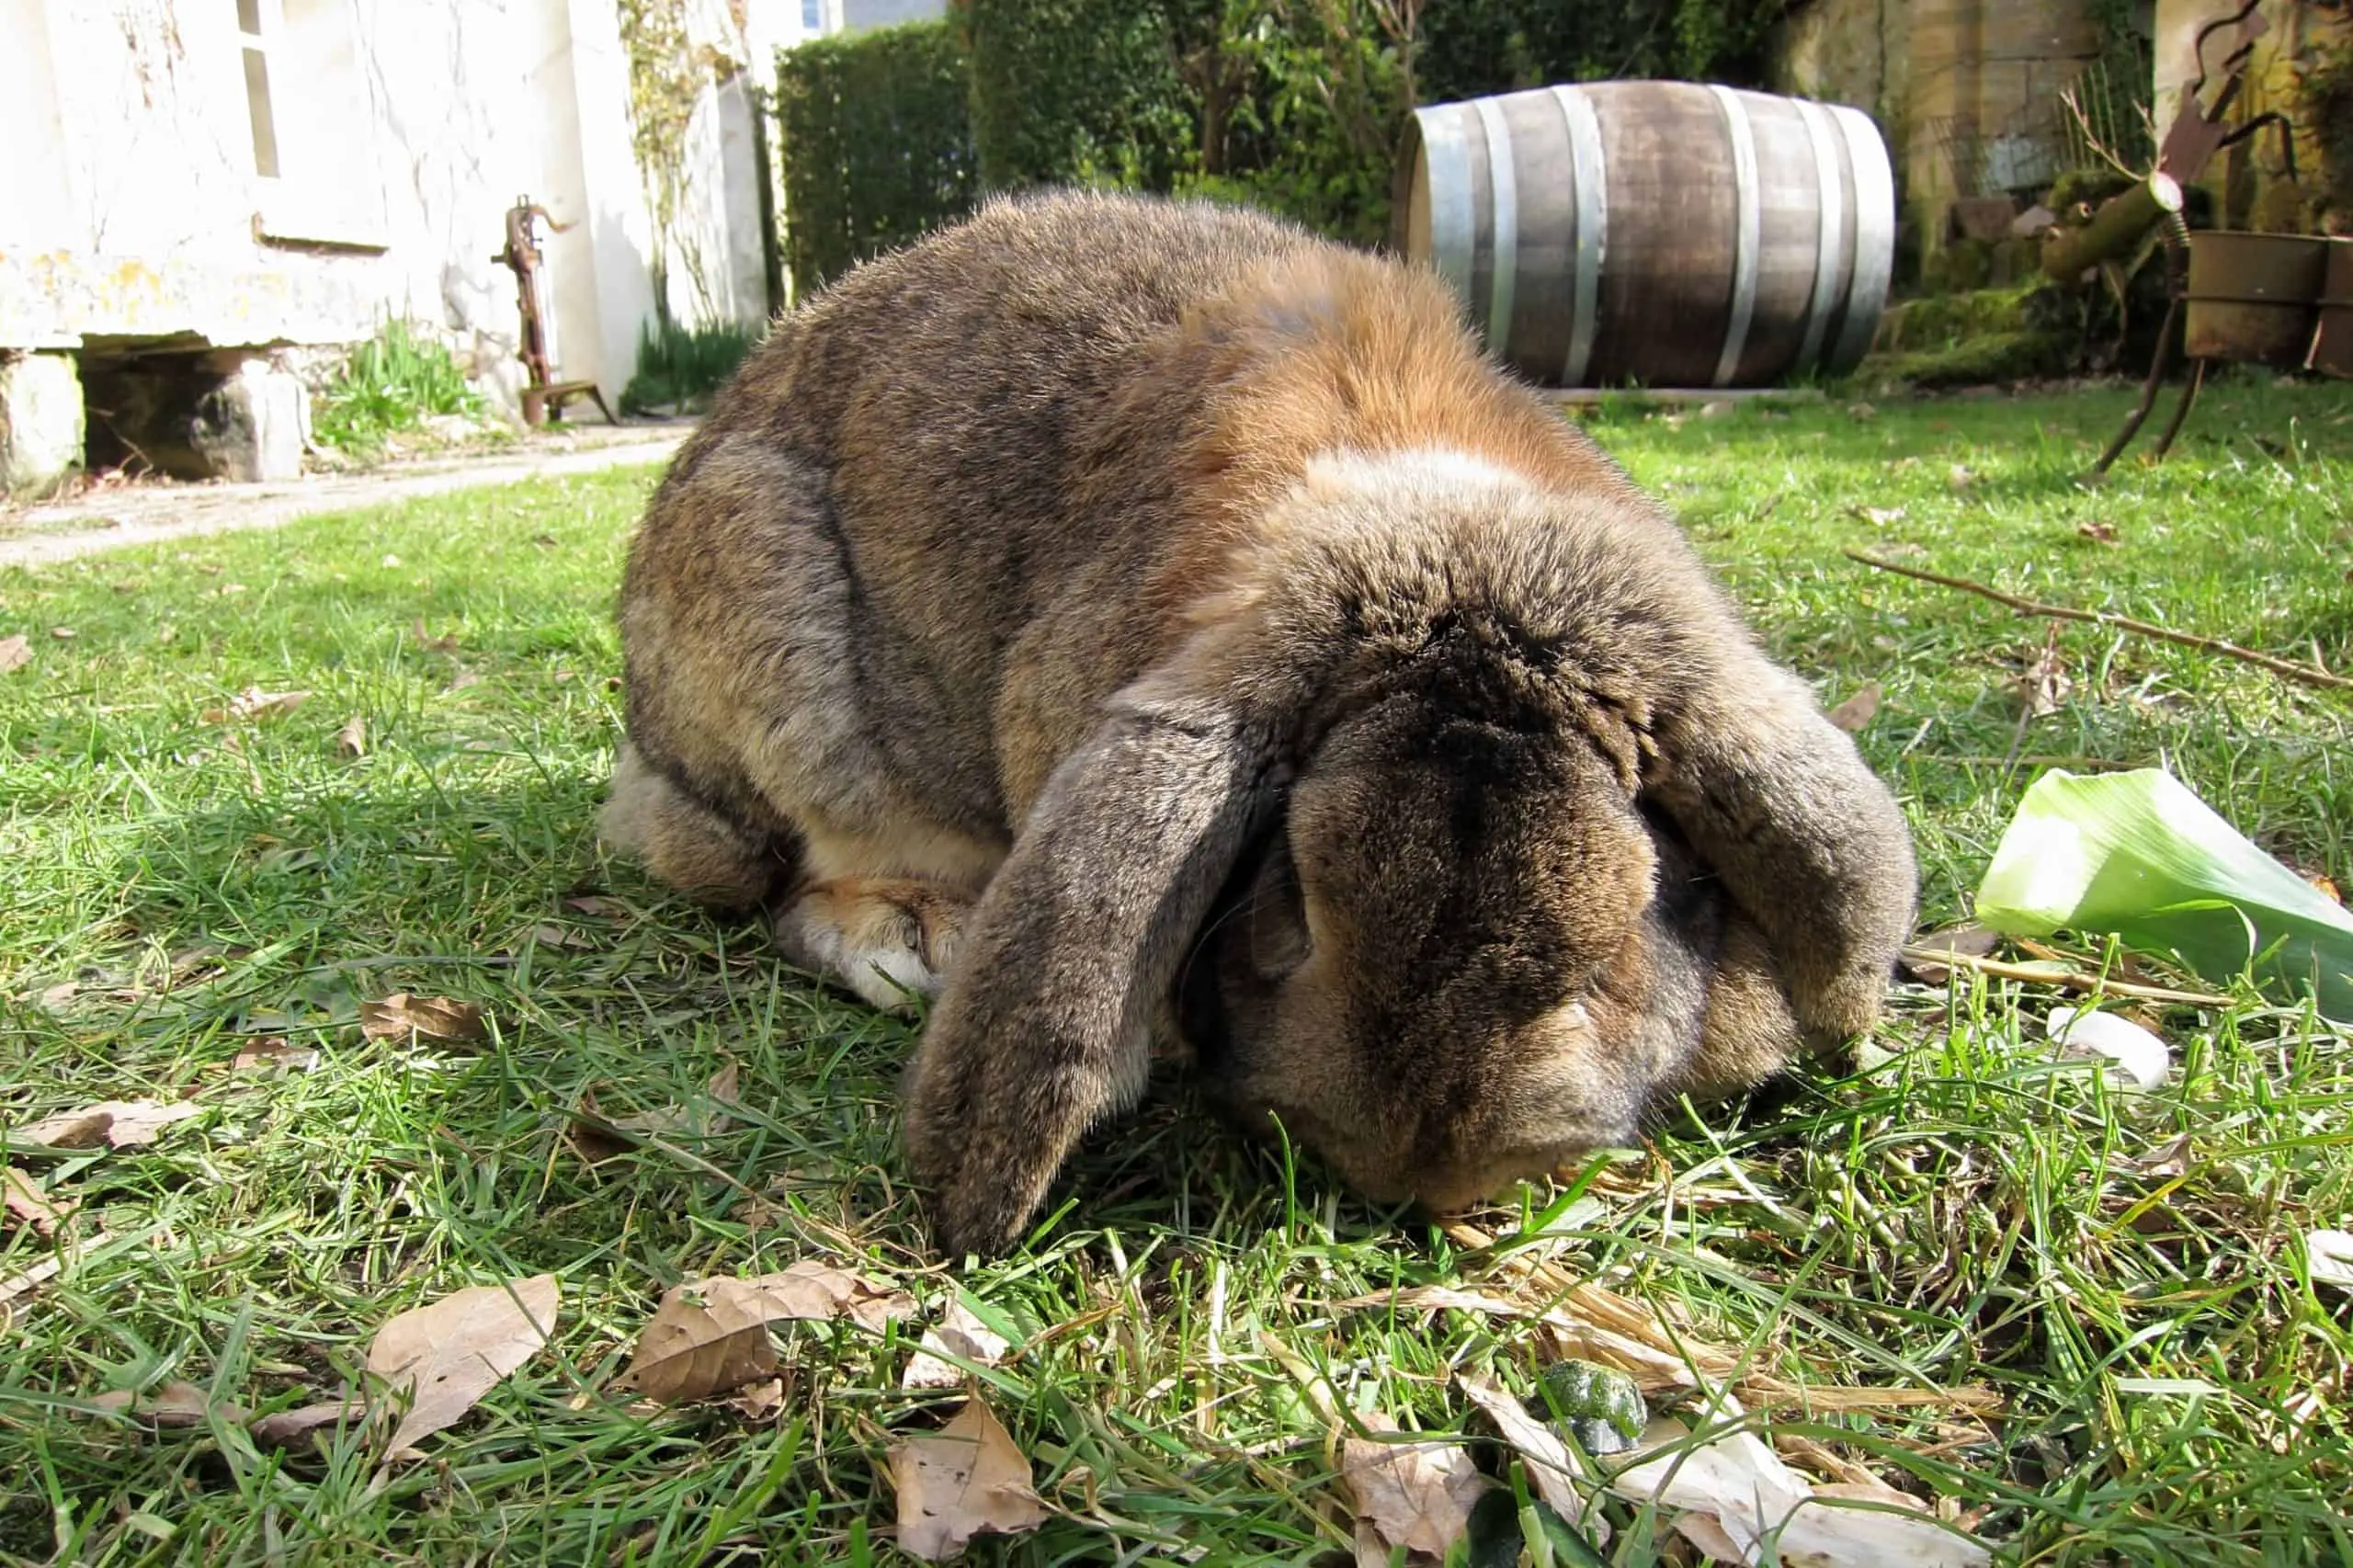 Making sure your garden is pet safe from weed killer spraying for your rabbit